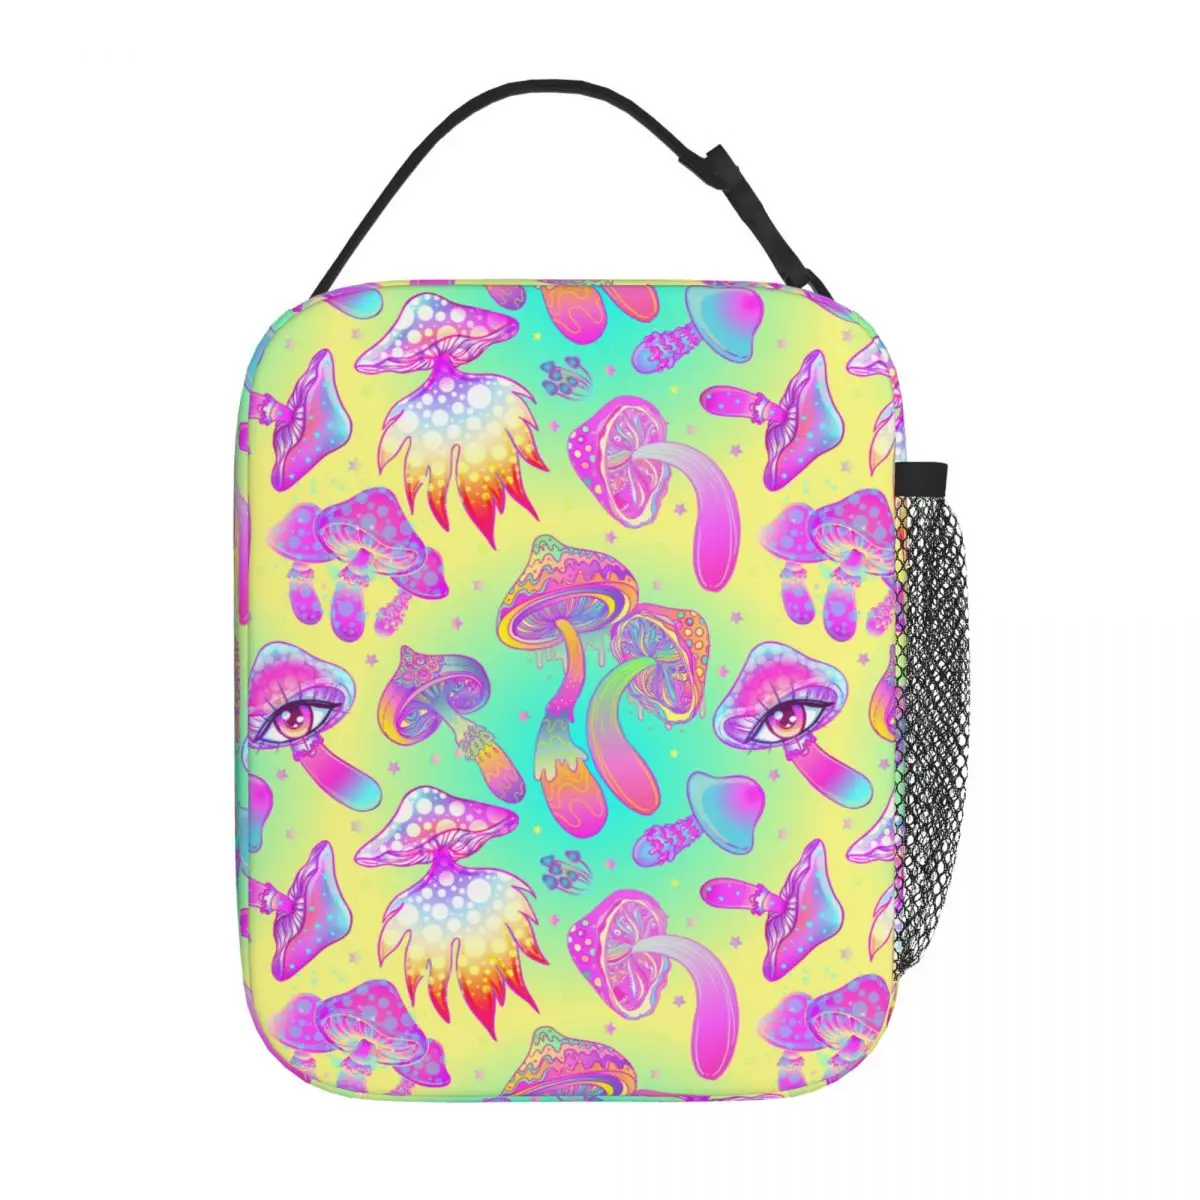 

Hippie Colorful Magic Mushrooms Insulated Lunch Tote Bag Tie Die Mushroom Trippy Food Box Thermal Cooler Bento Box School